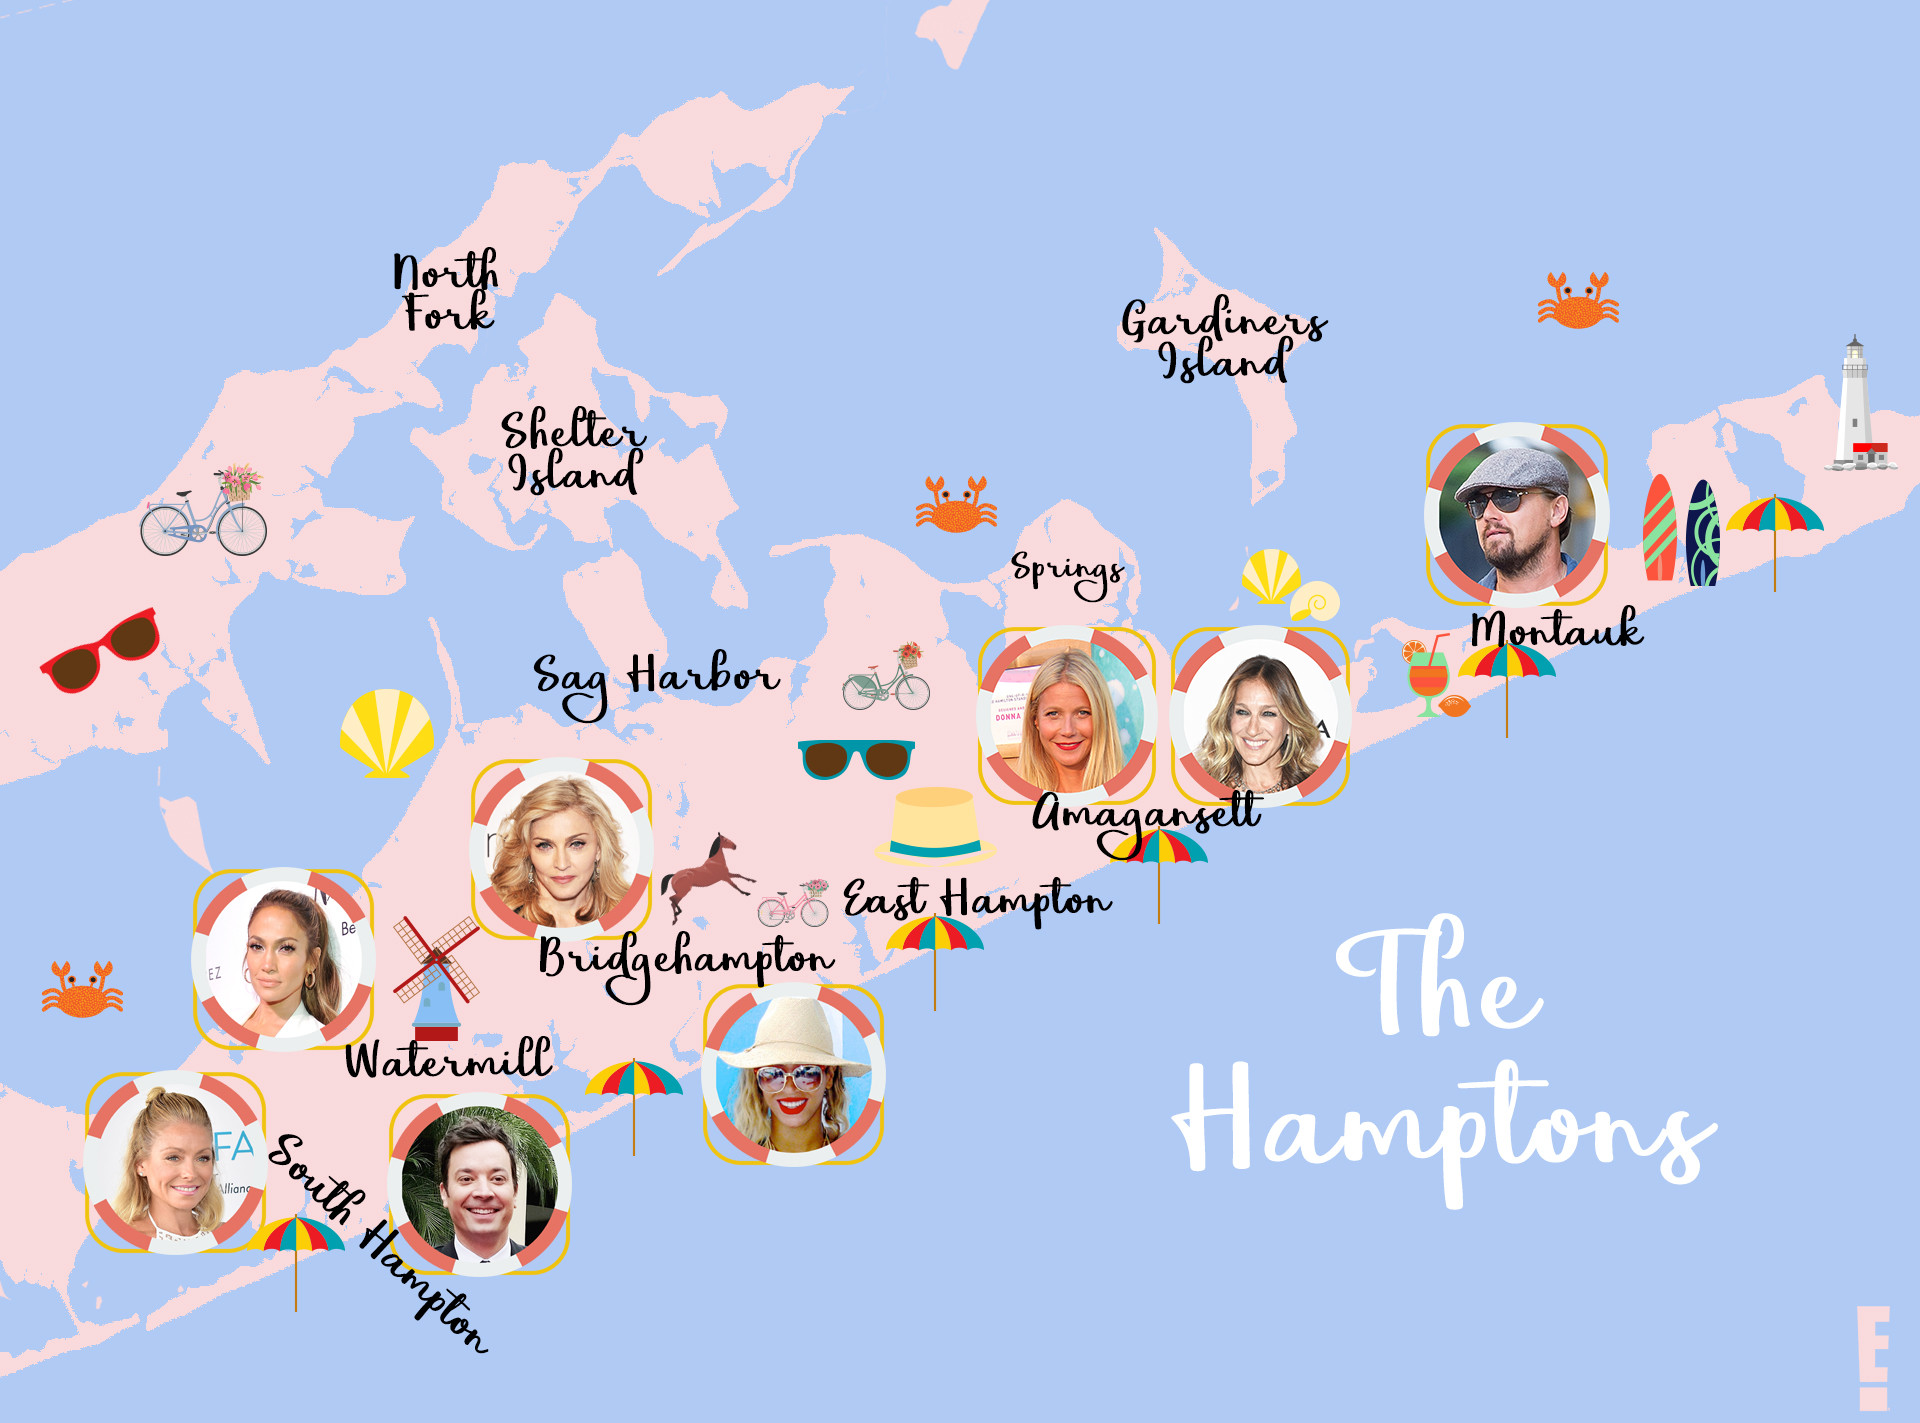 Rs 1920x1423 170525171834 1024 The Hamptons Celebrities Mh 052517 ?fit=around|1920 Auto&output Quality=90&crop=1920 Auto;center,top